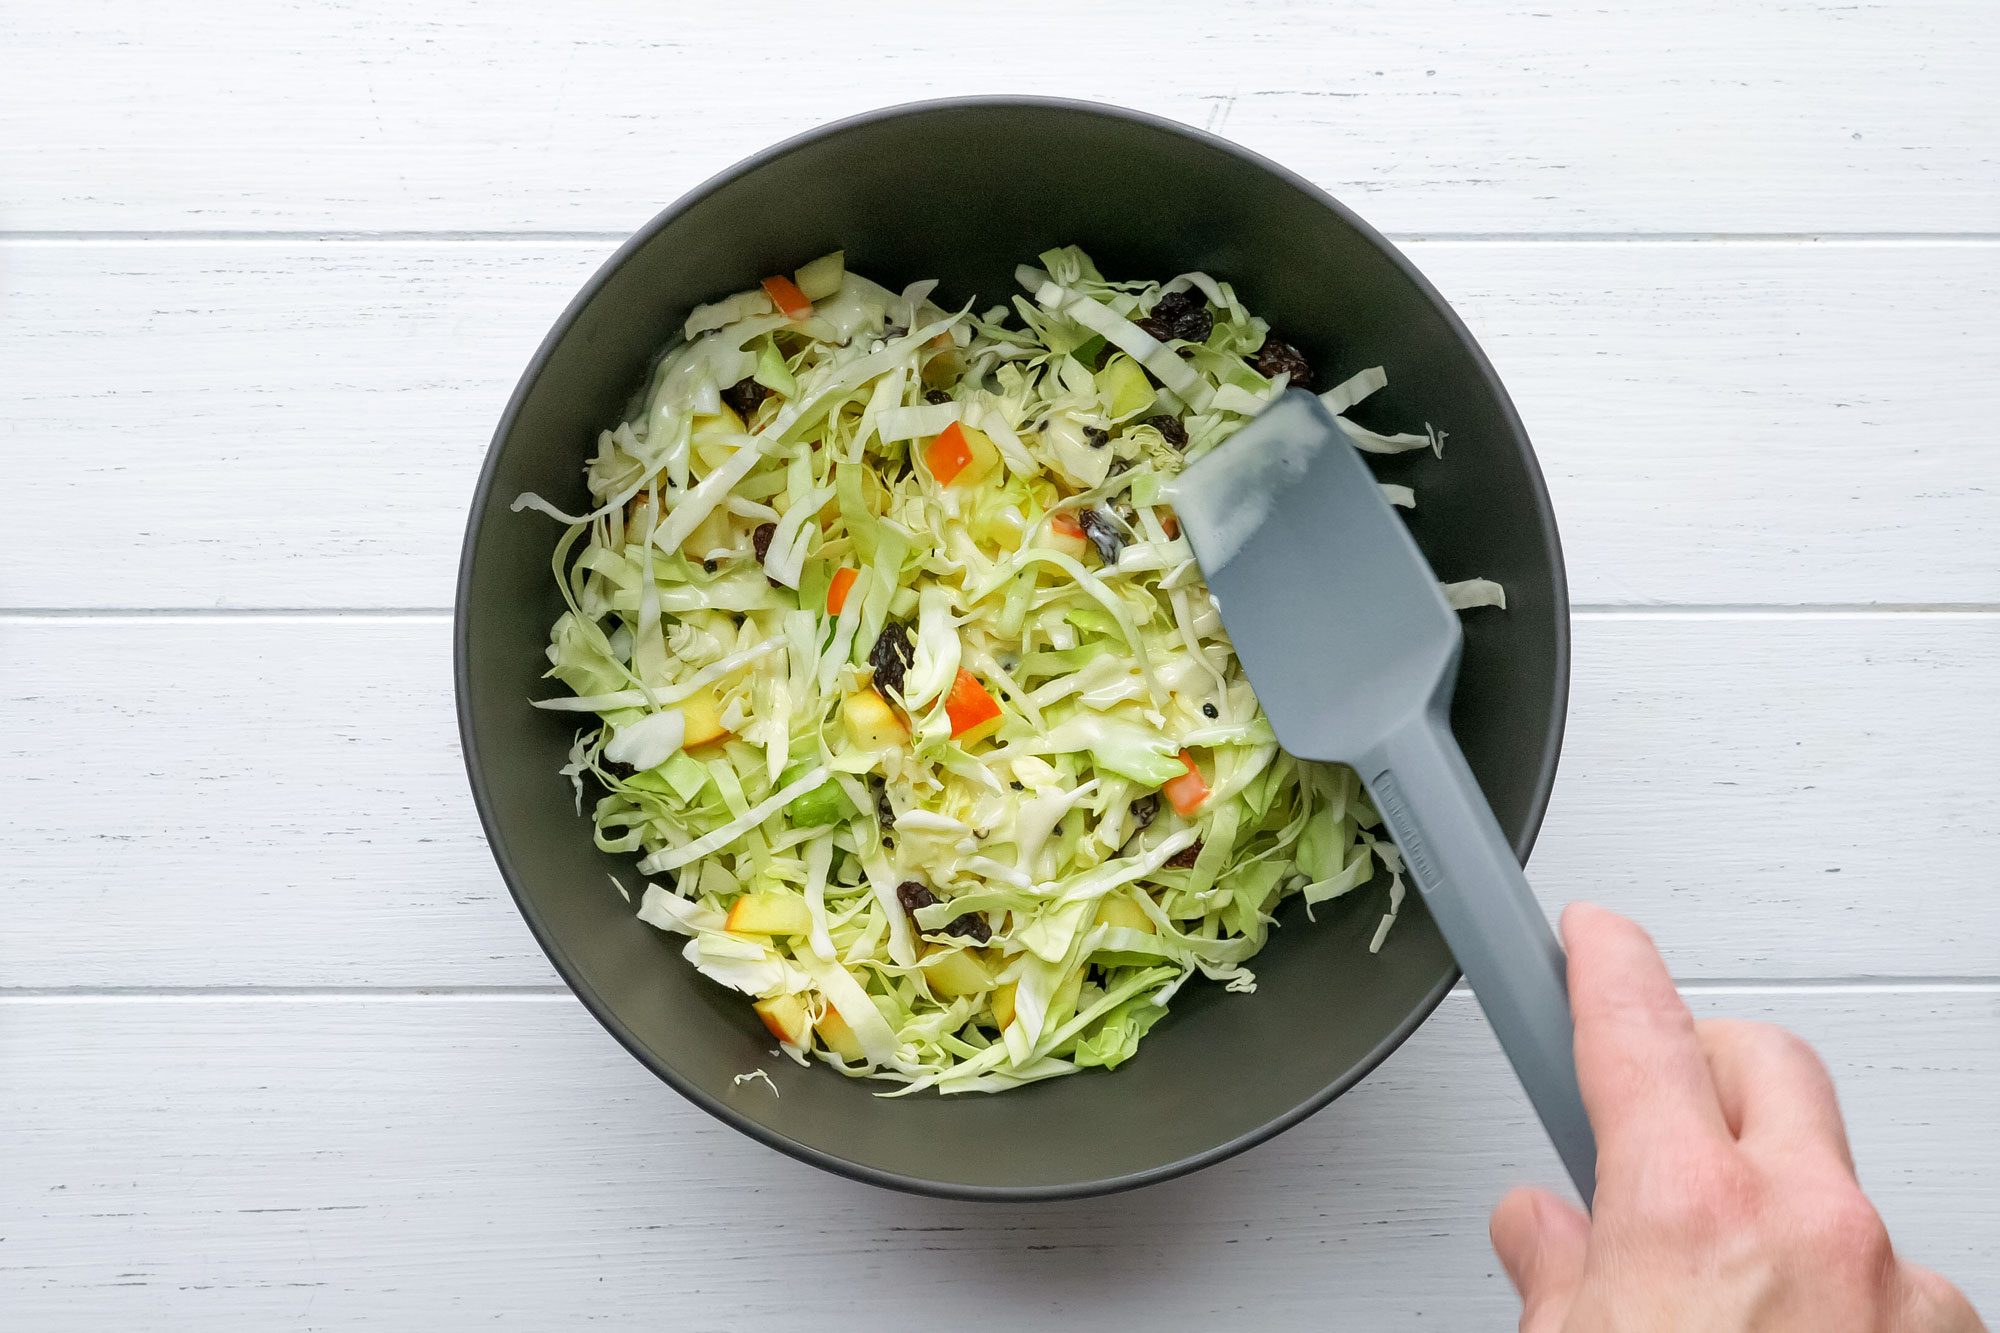 Tossing Apple Slaw Mix in a large bowl on painted wooden surface